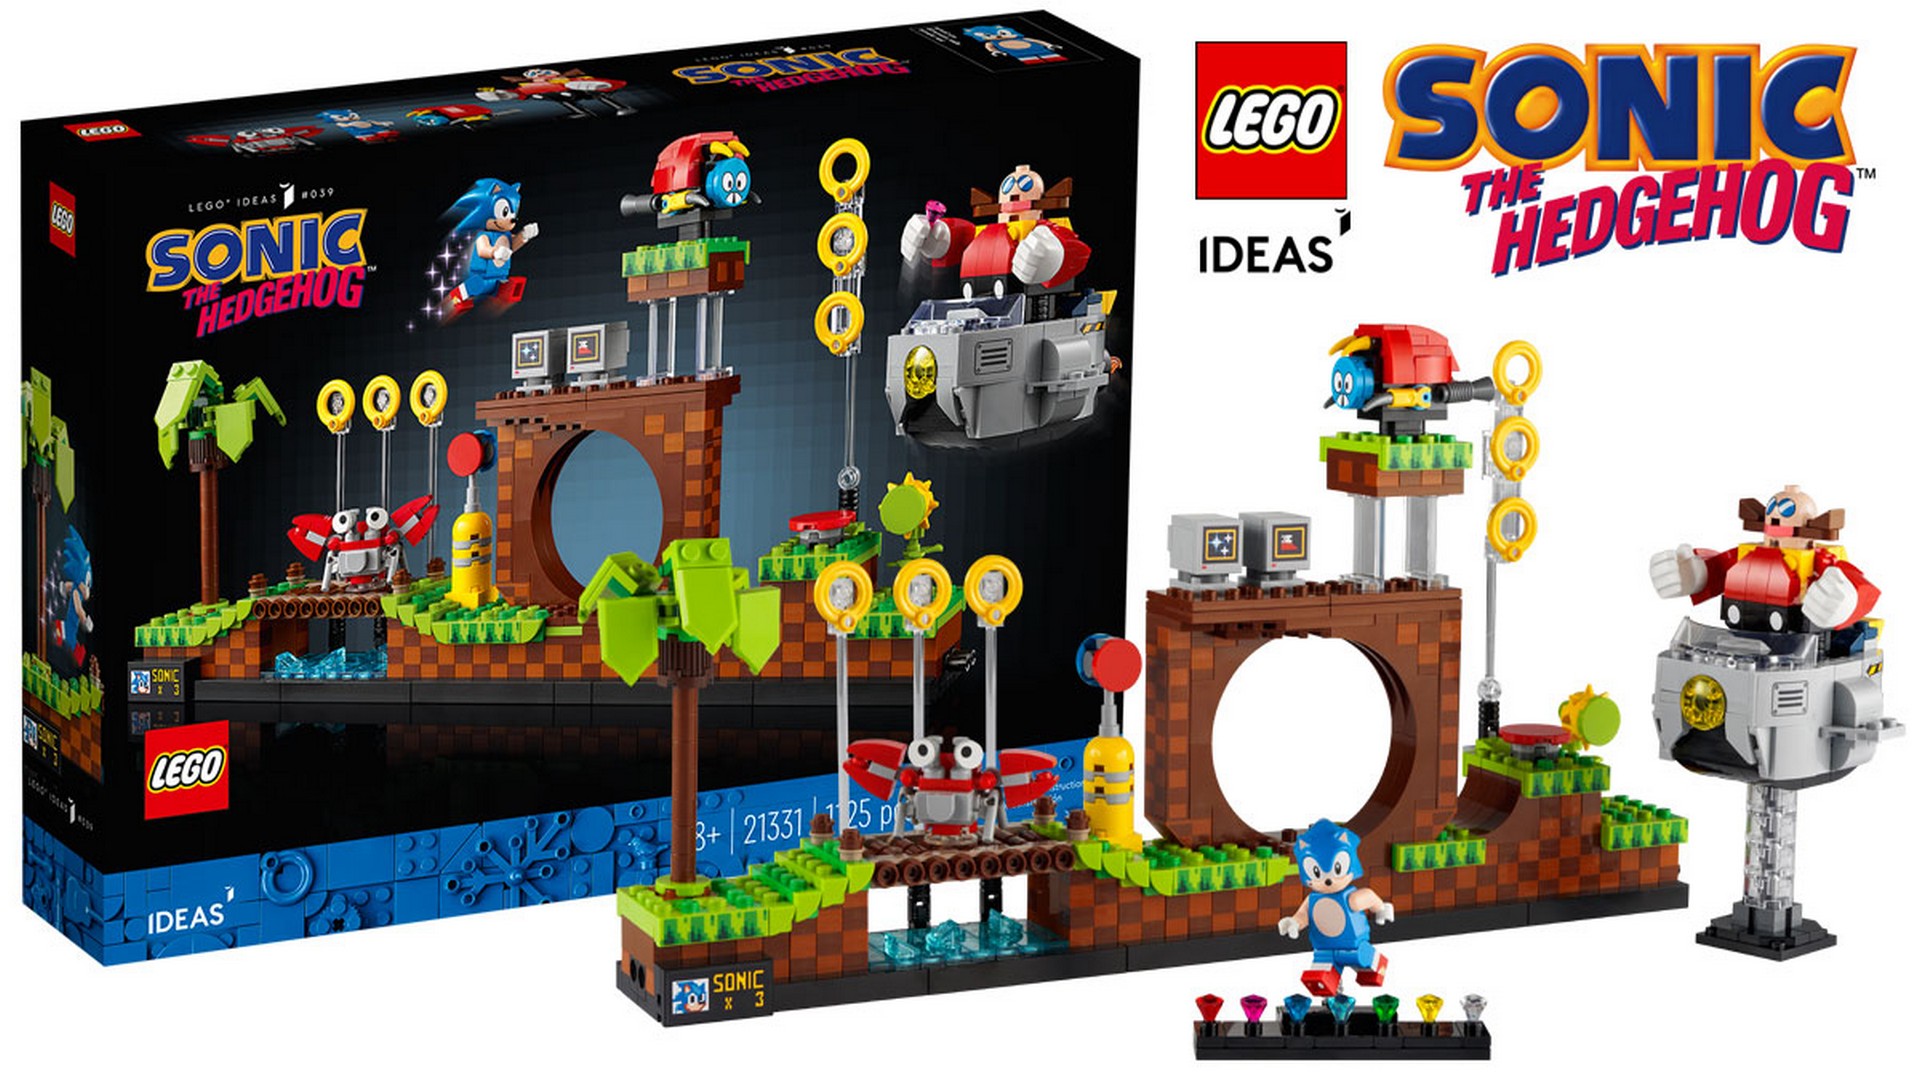 Sega and Brickman launch Sonic Superstars Lego building competition